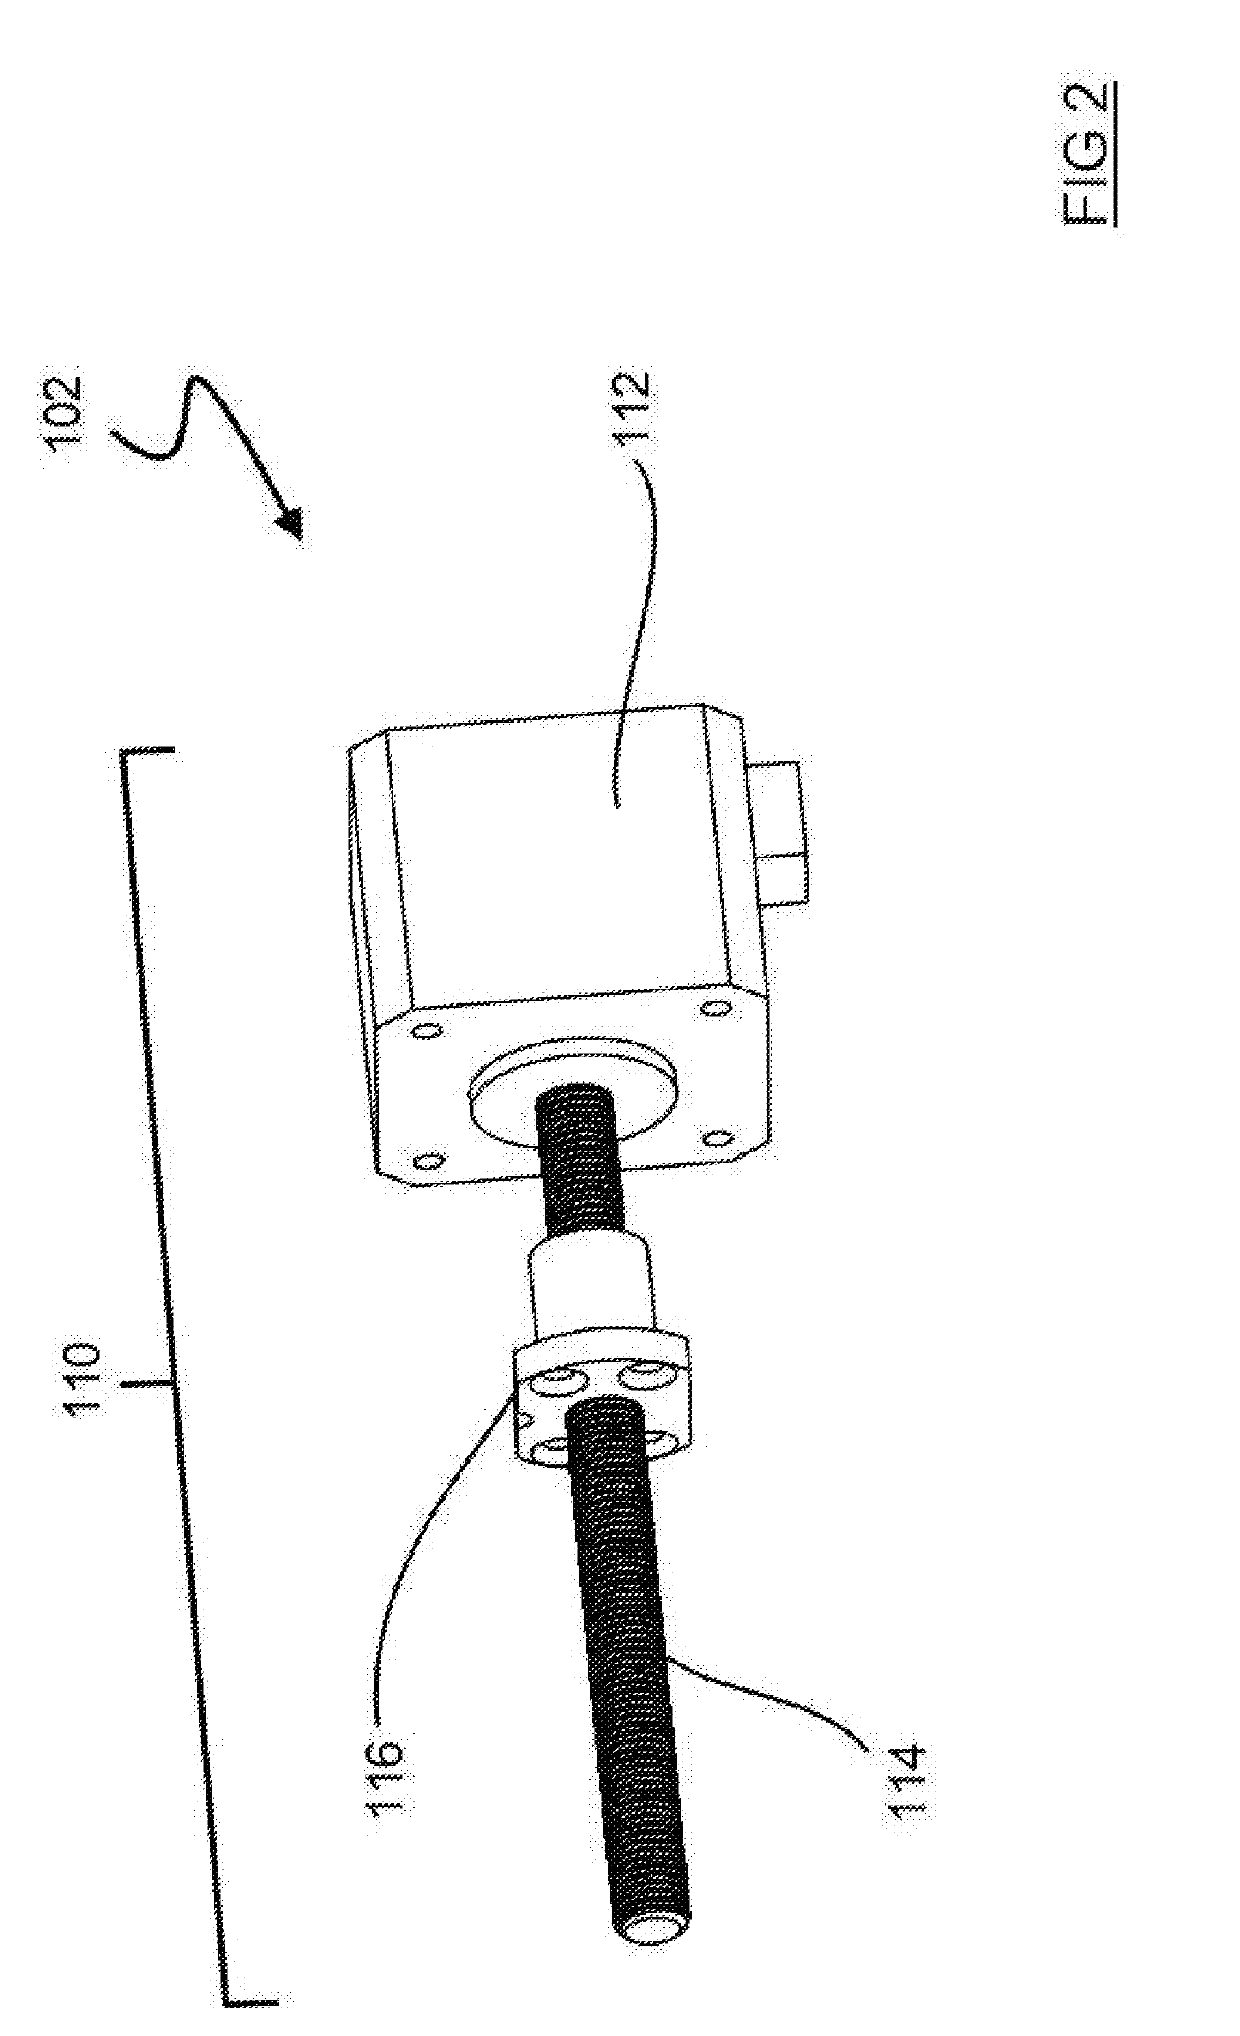 Deployable Fan with Linear Actuator